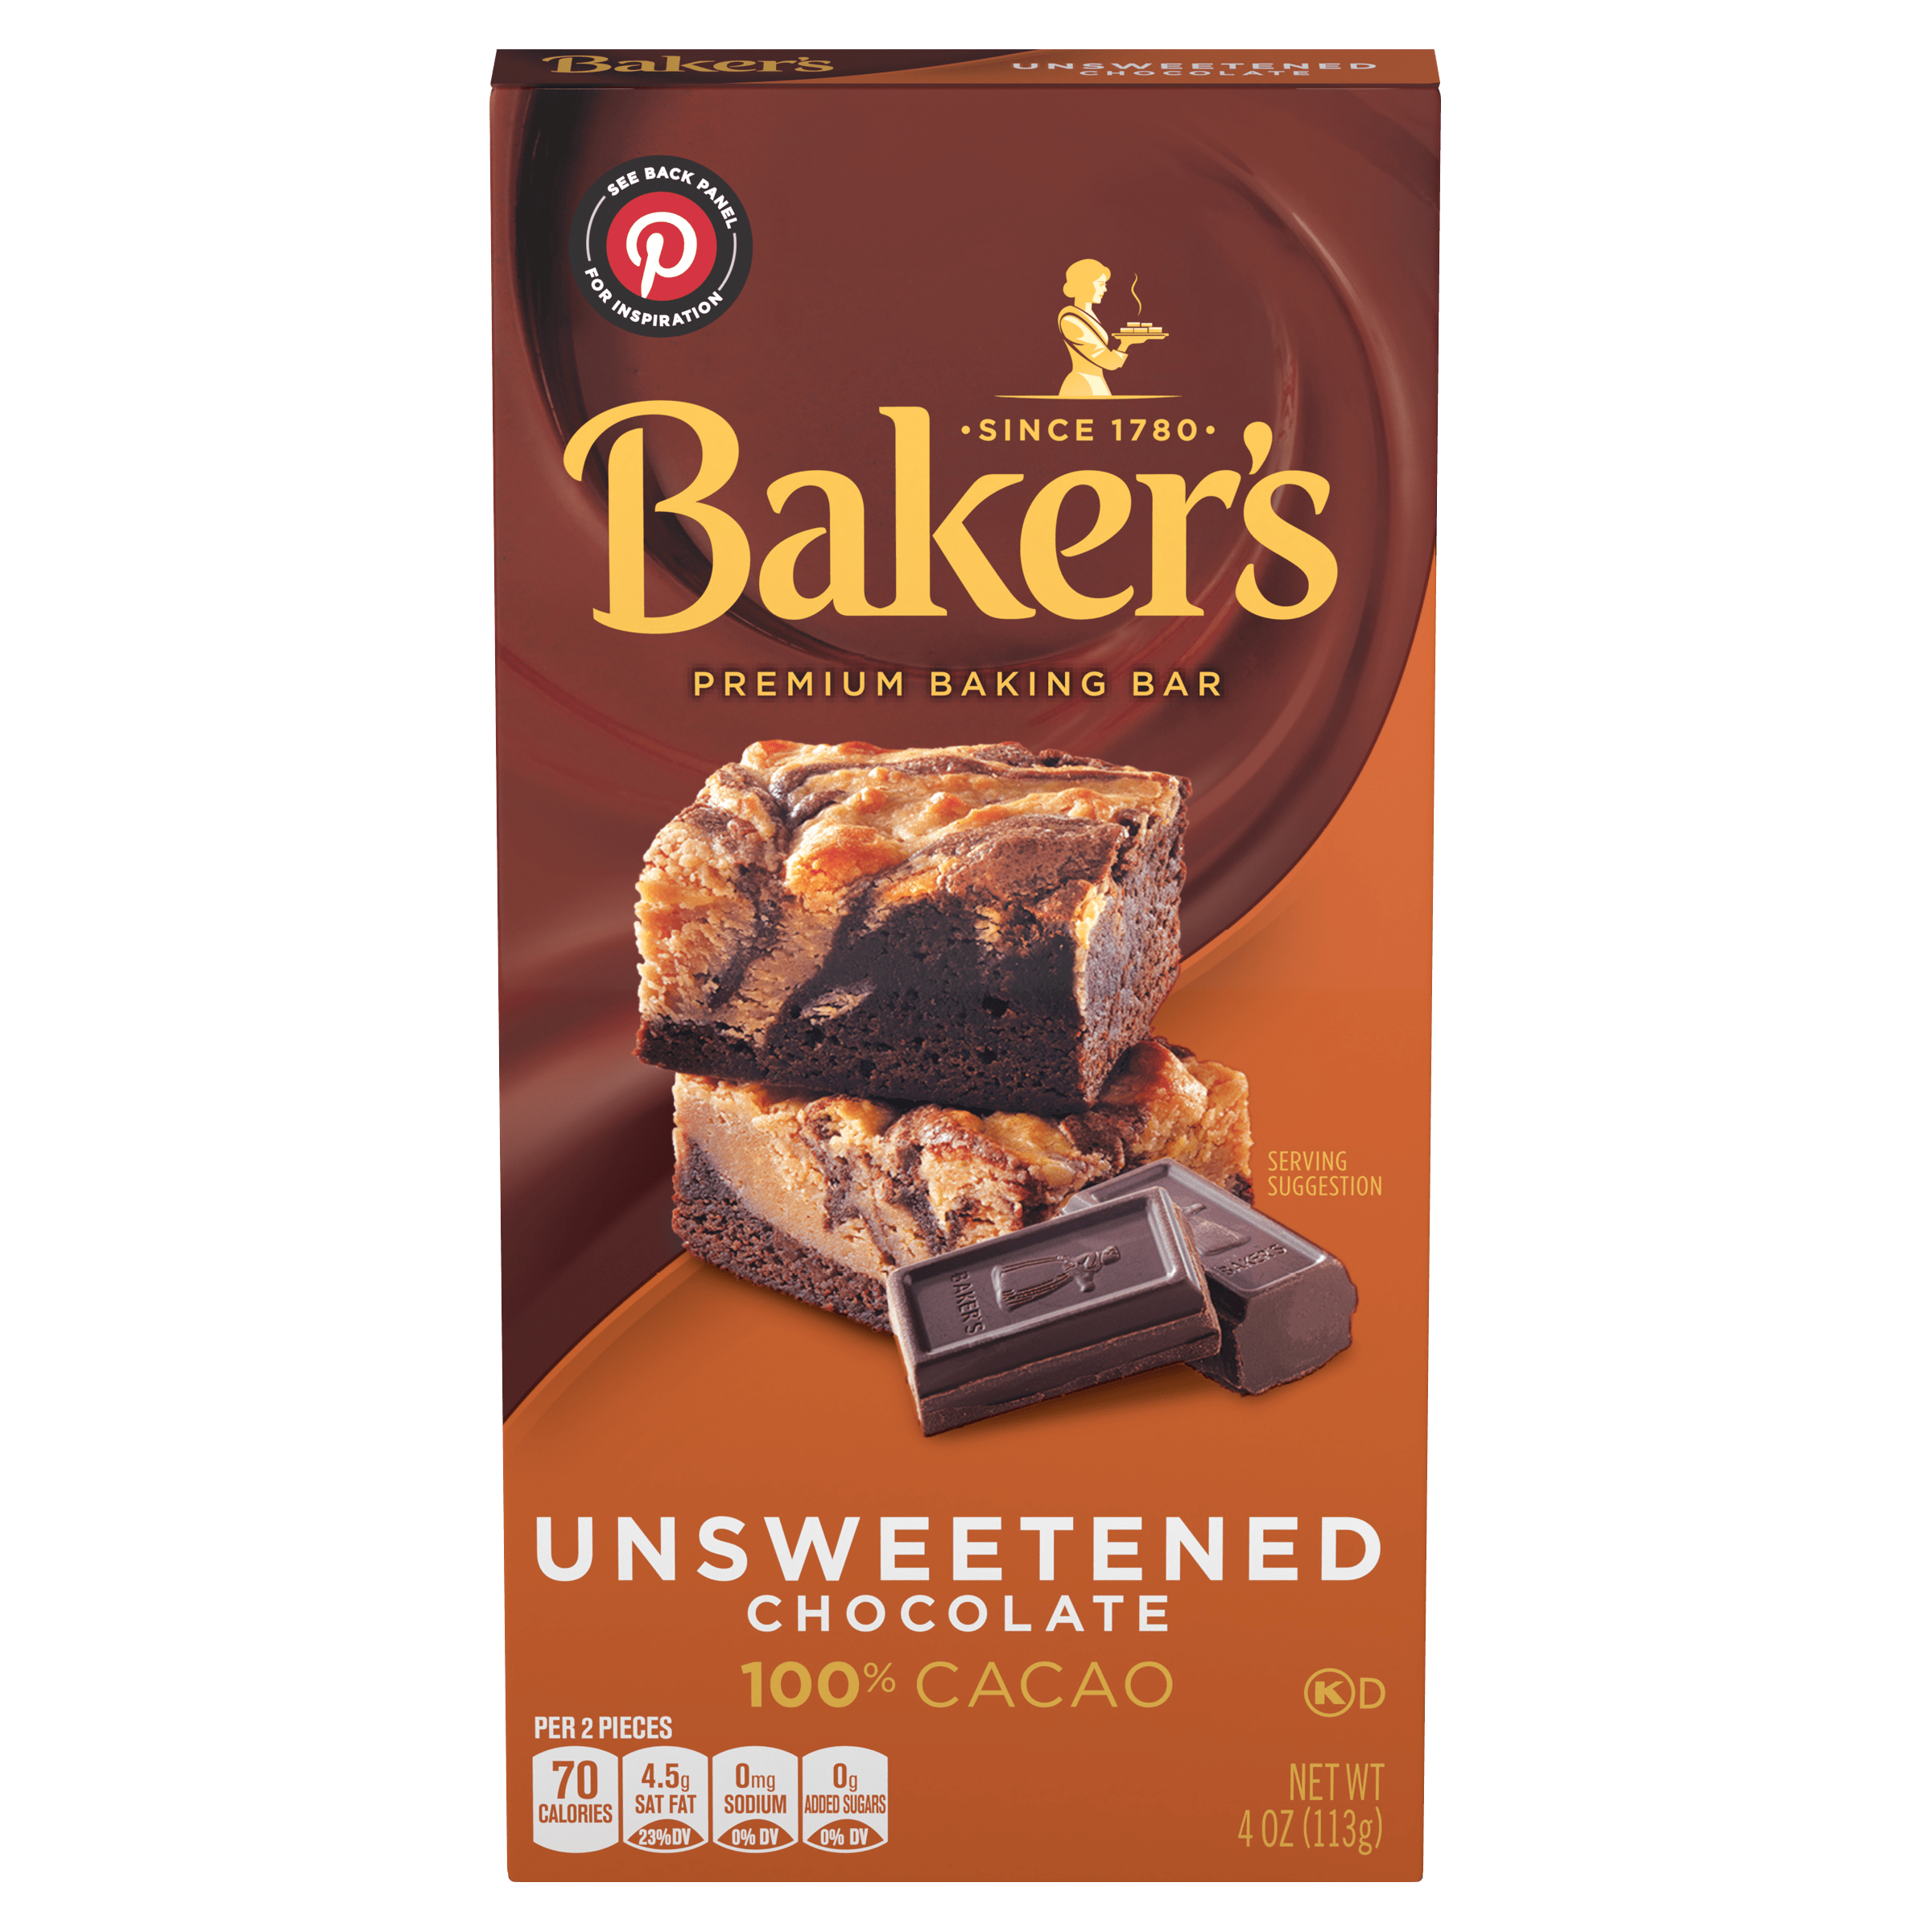 Unsweetened Chocolate Premium Baking Bar with 100 % Cacao